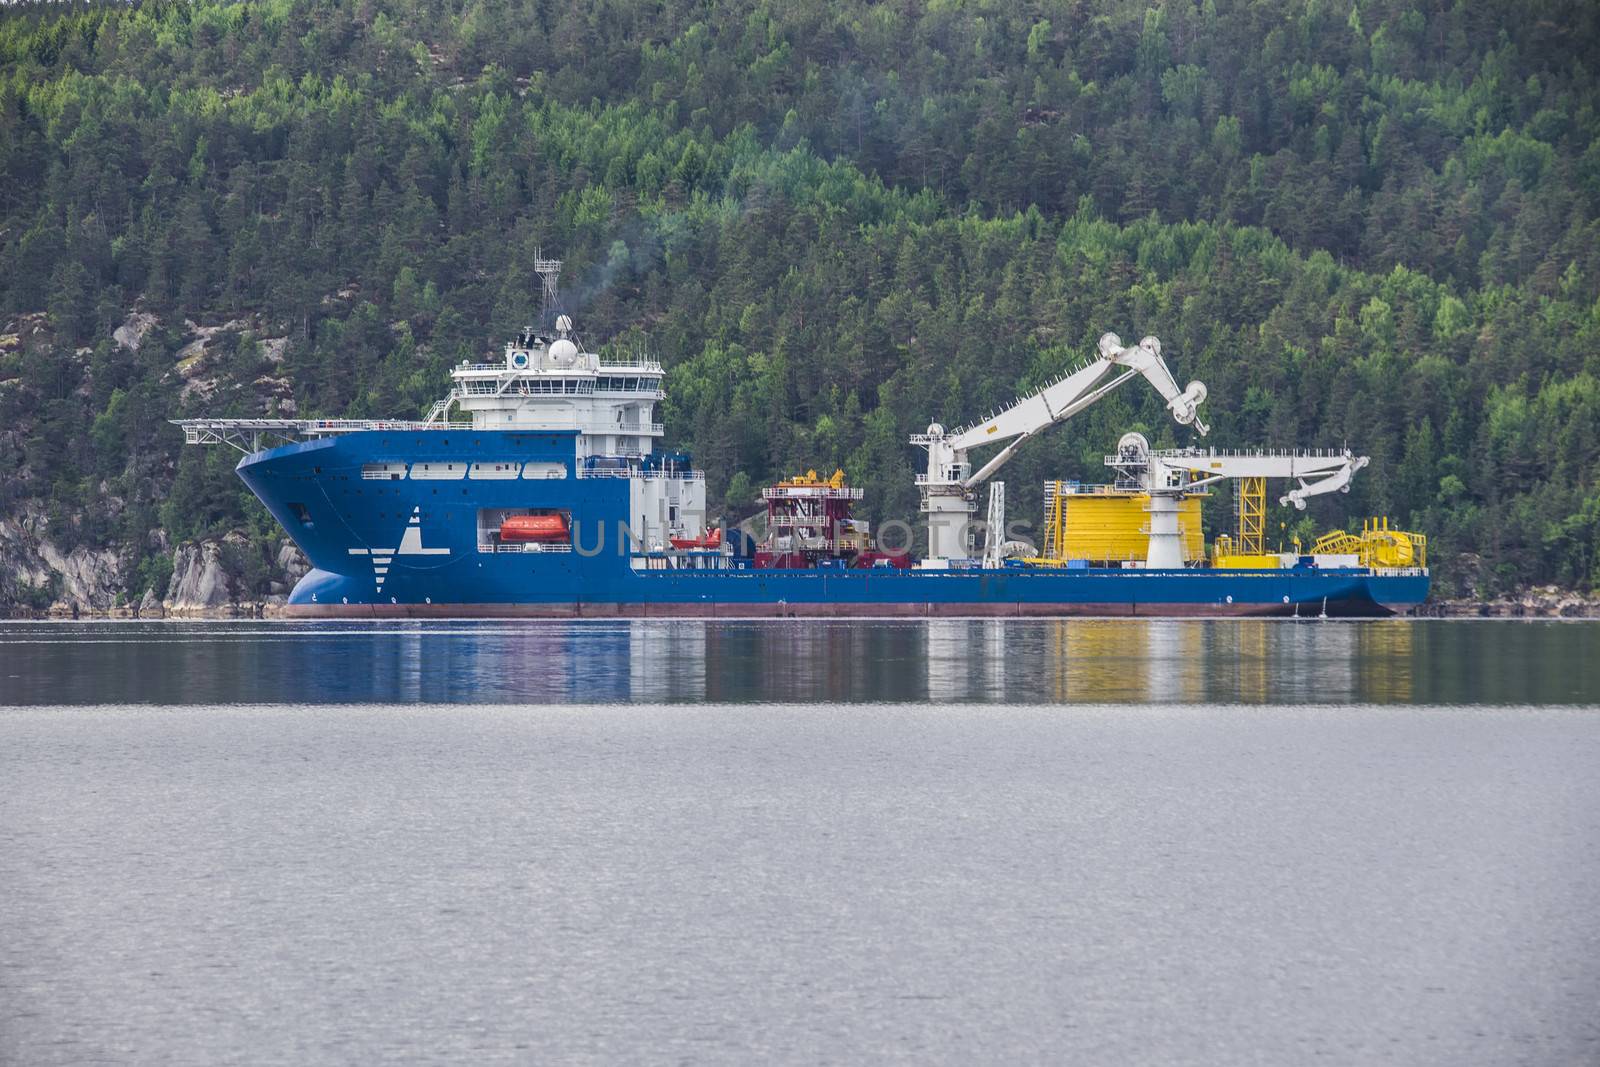 North sea giant is a large offshore supply ship. The picture is shot from the port of Halden, Norway and out towards Iddefjord where the ship is at anchor.